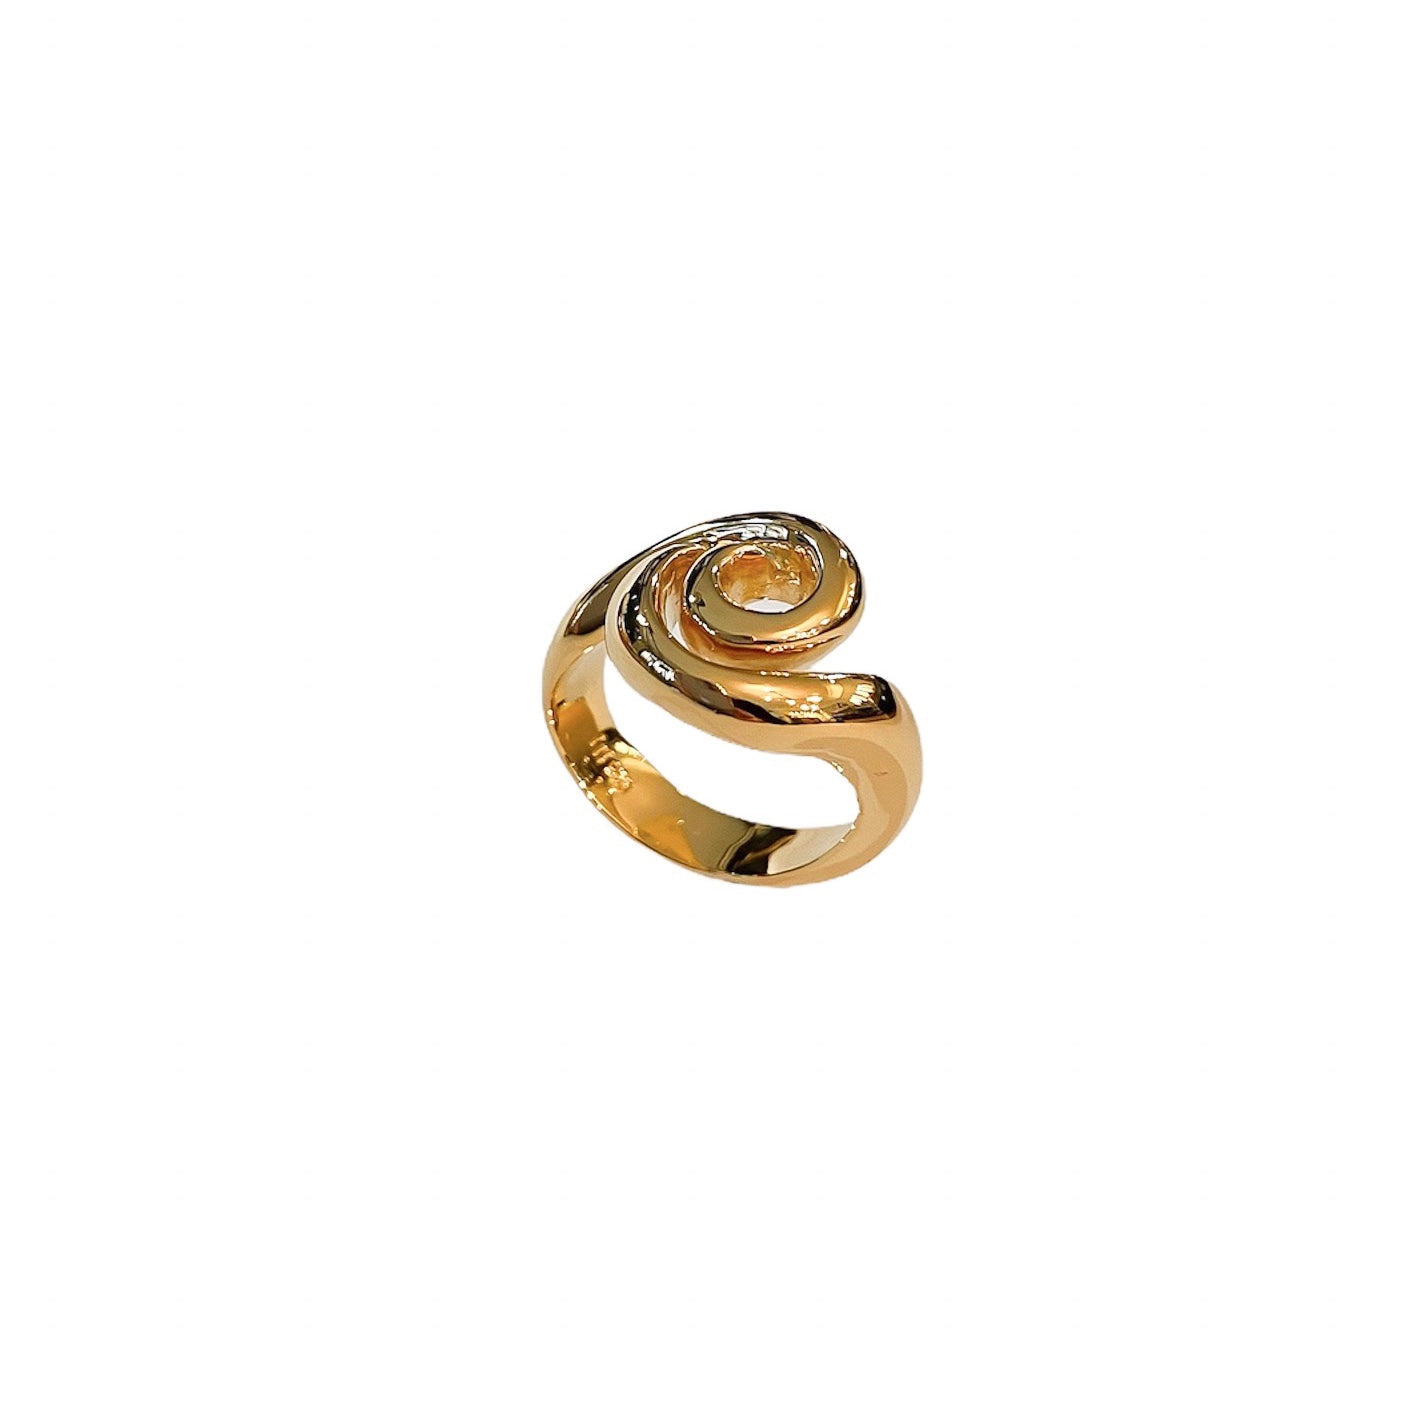 Surrea Blank gold plated silver ring, side view.